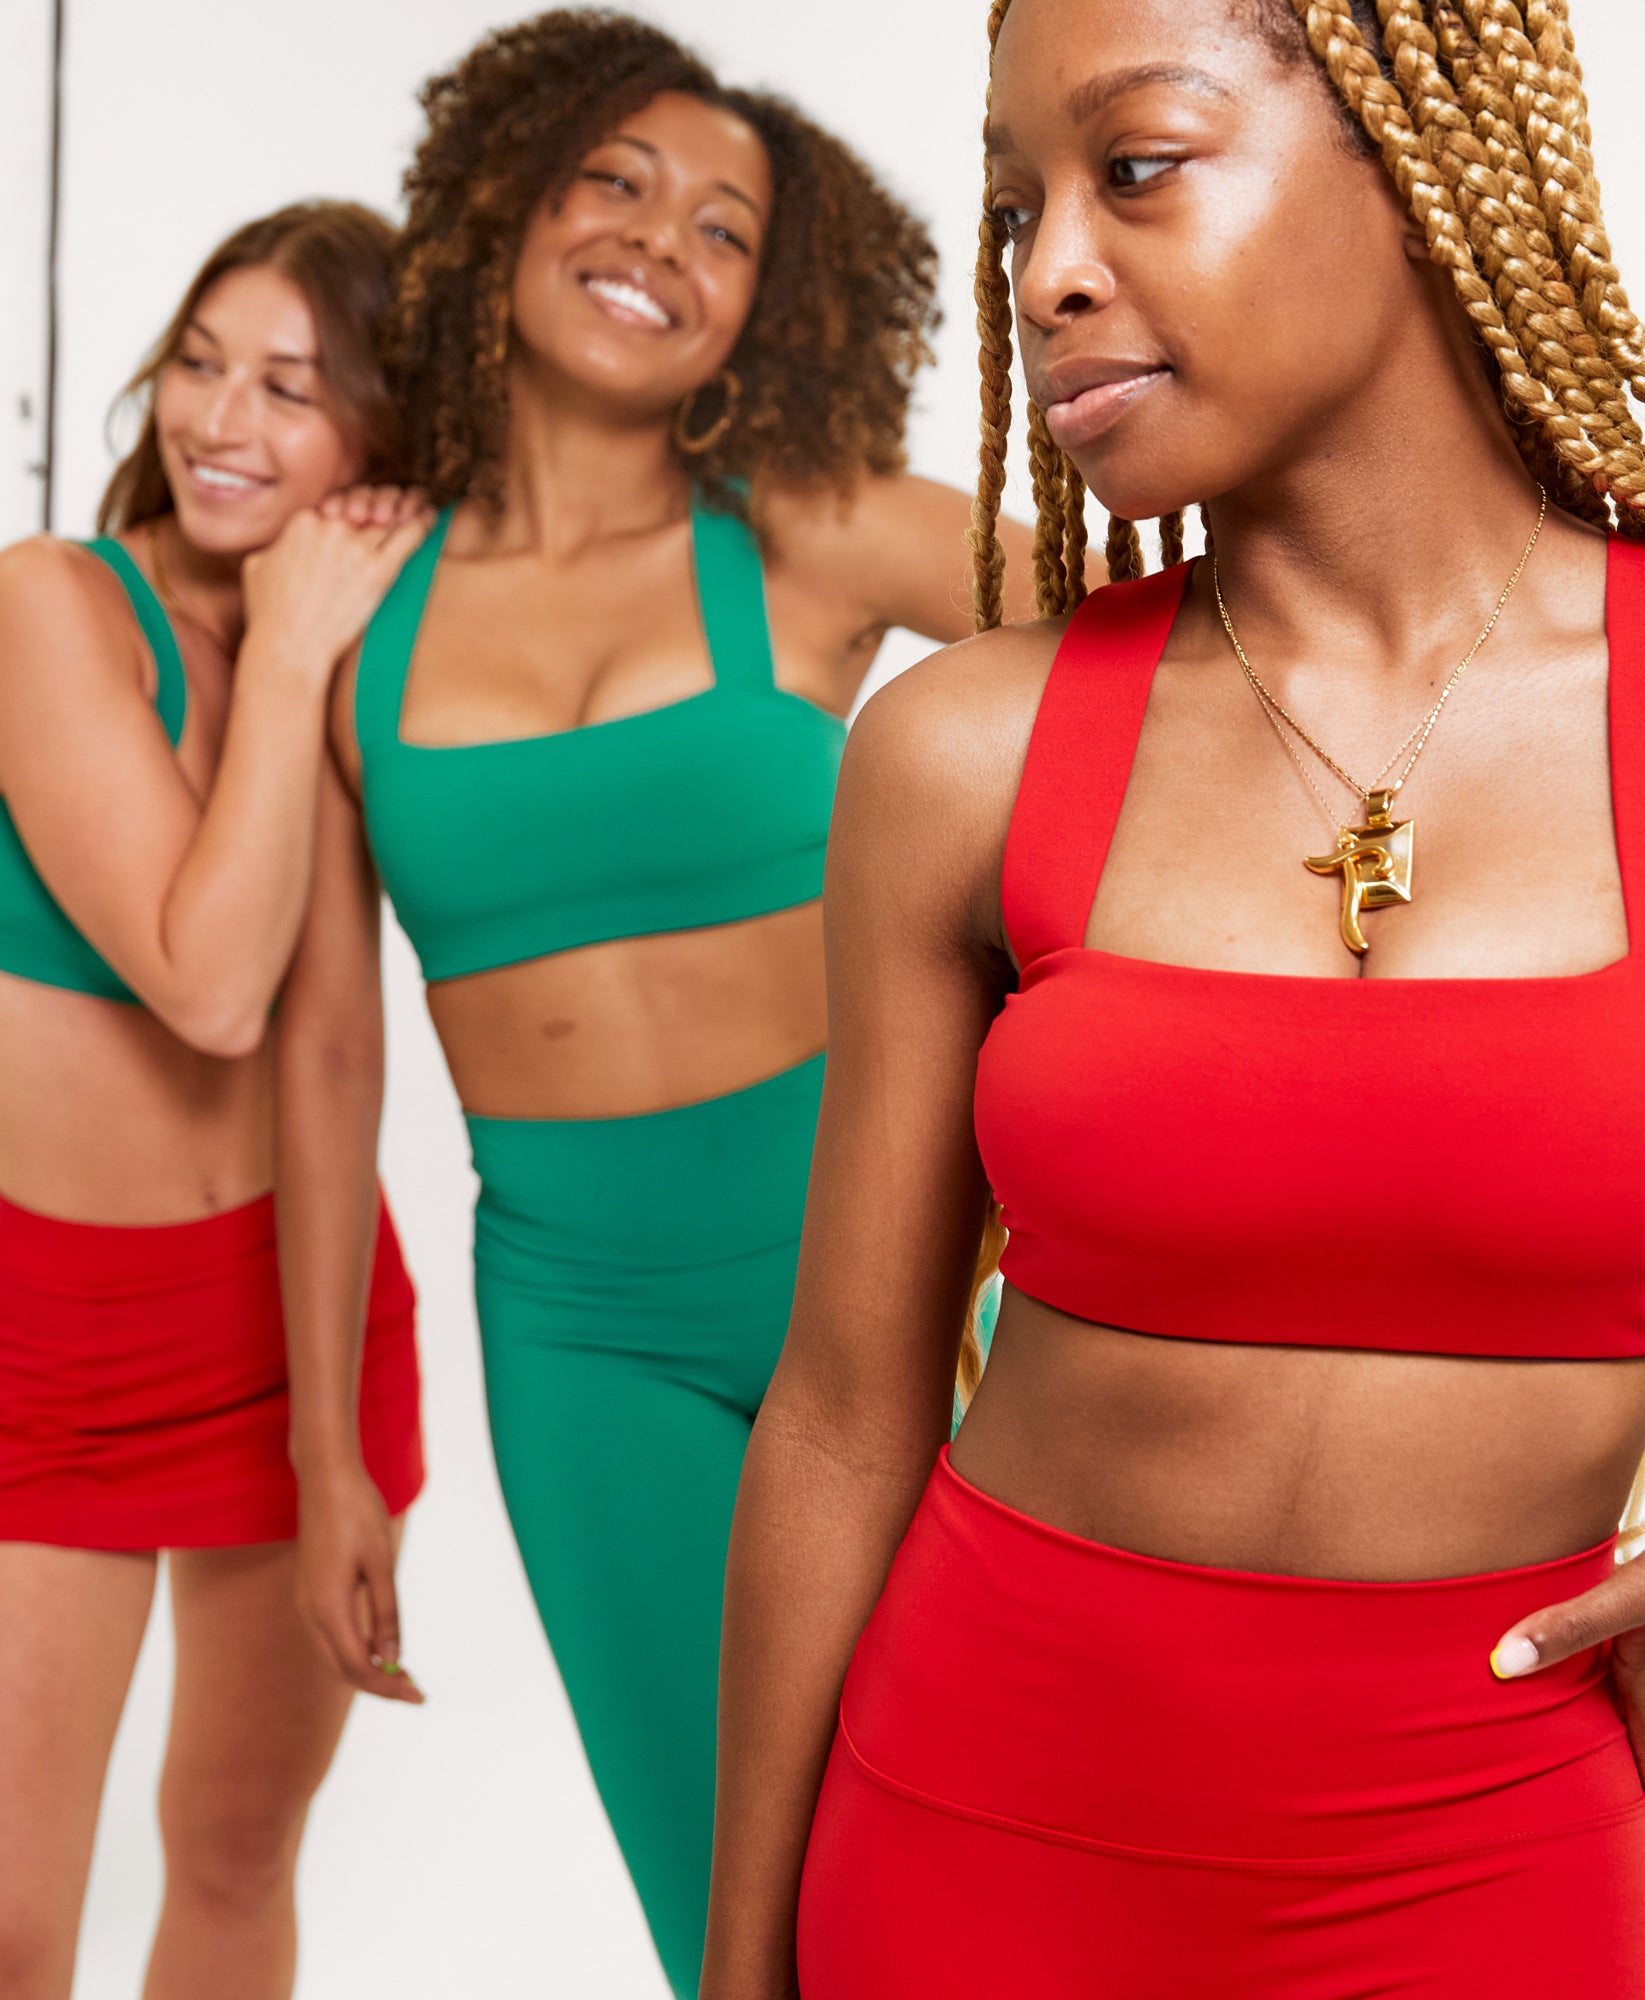 Wear One's At Routine Bra in Casanova Red on Model with Models in the Background